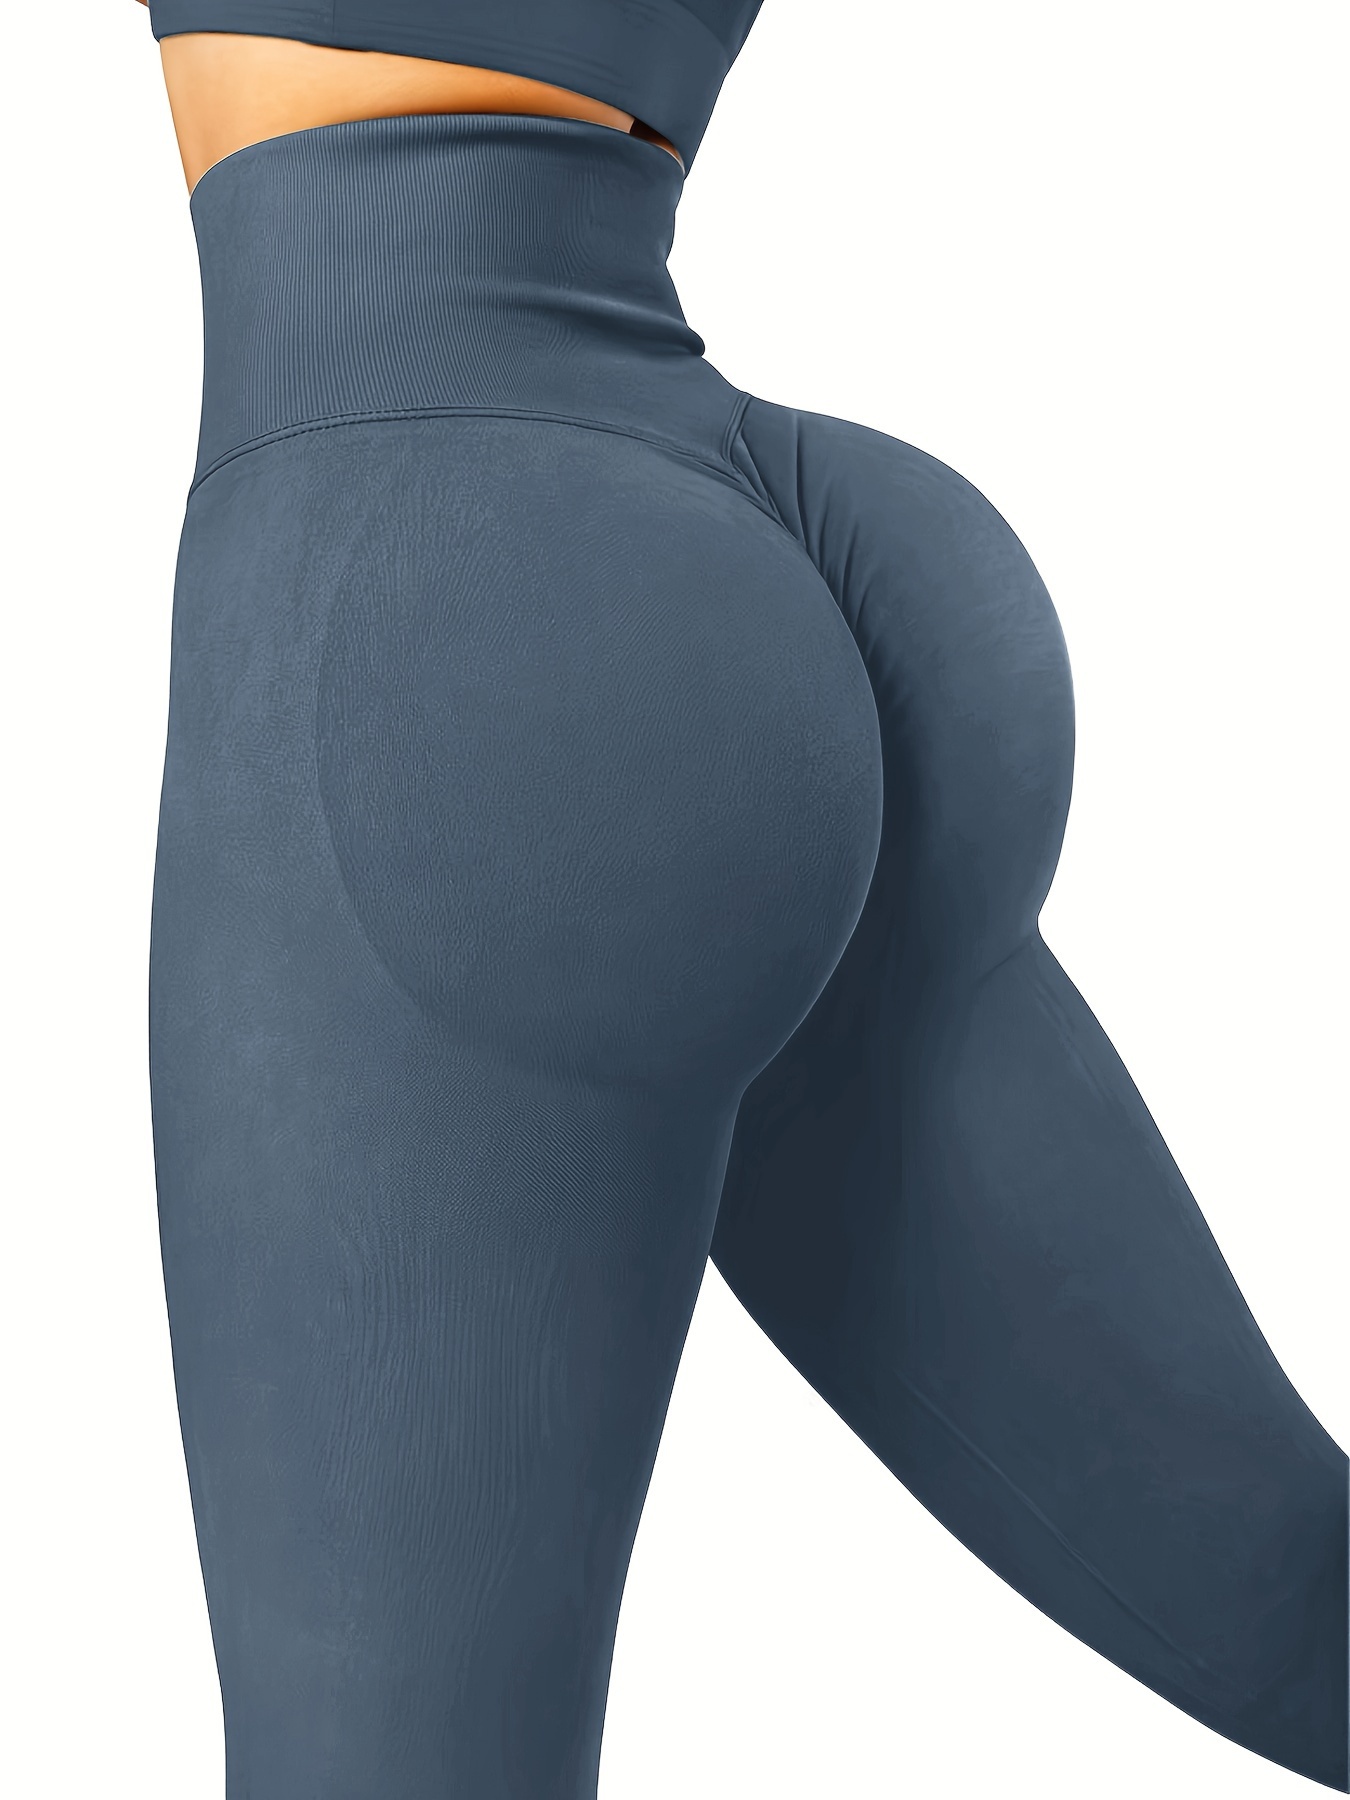 Women's High Waisted Yoga Pants Tummy Control Booty Leggings Workout  Running Butt Lift Textured Tights, Navy Blue, Large 